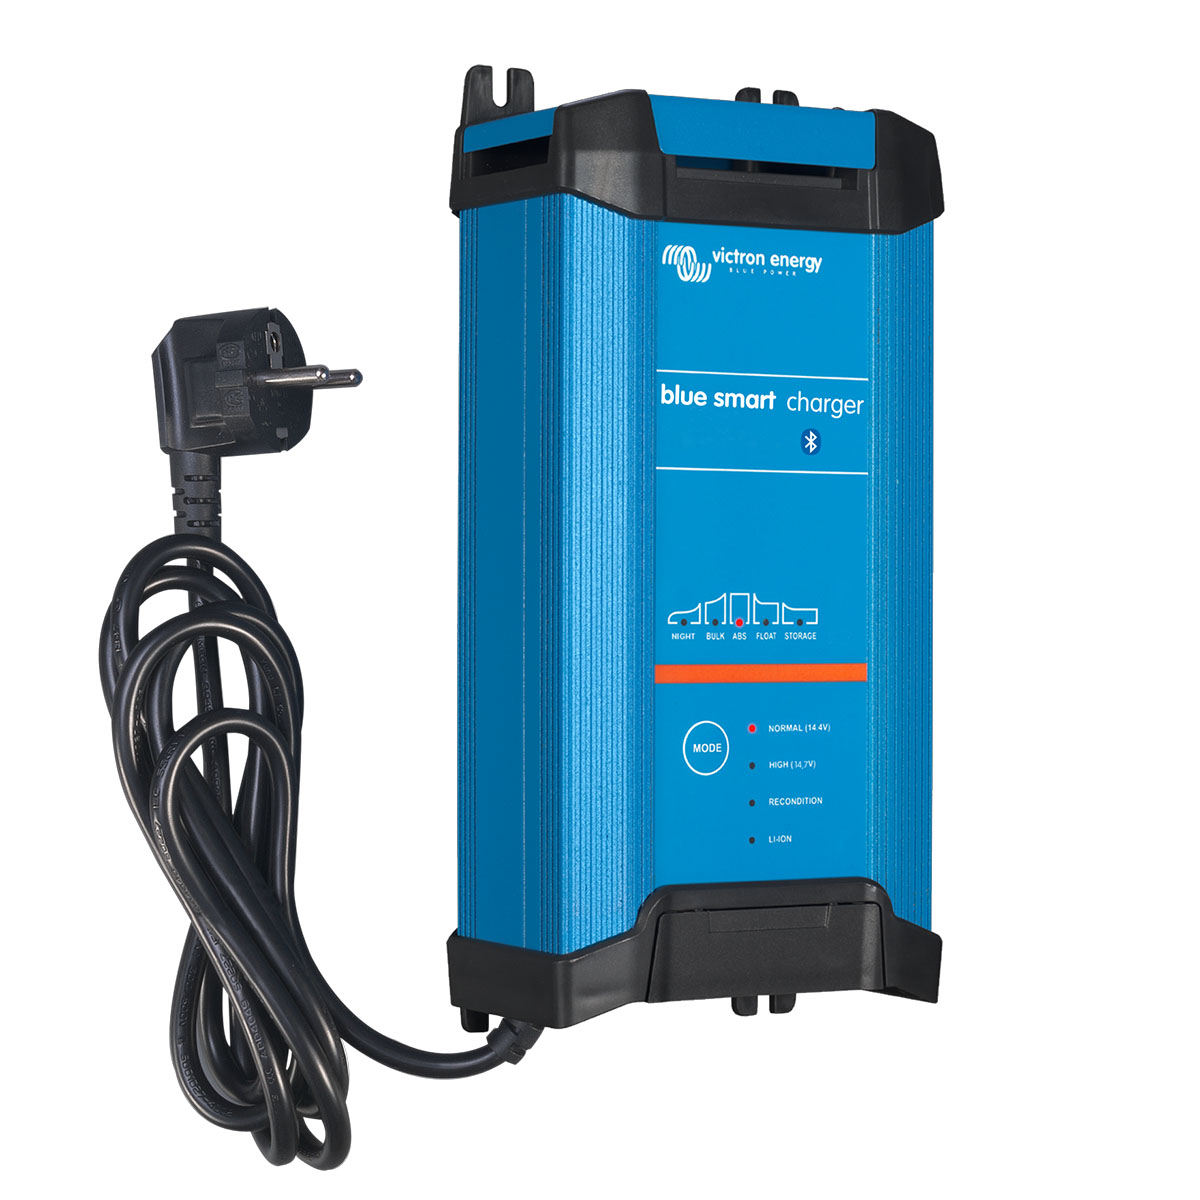 Victron Blue Smart IP22 Charger 12/30(3) 230V CEE 7/7 (USt-befreit nach §12 Abs.3 Nr. 1 S.1 UStG)